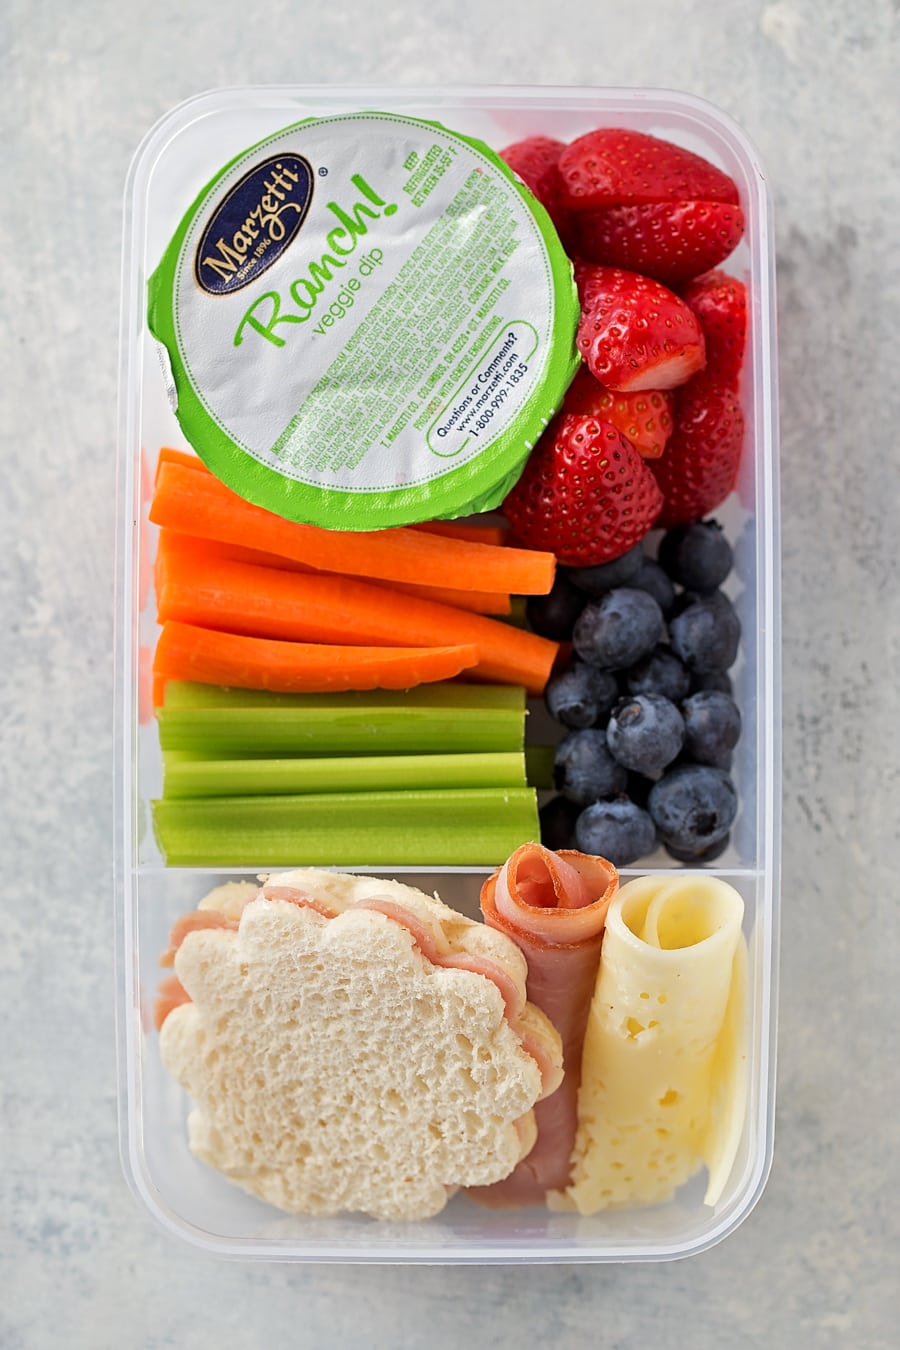 school lunch box idea with sandwich, berries, carrots, and celery